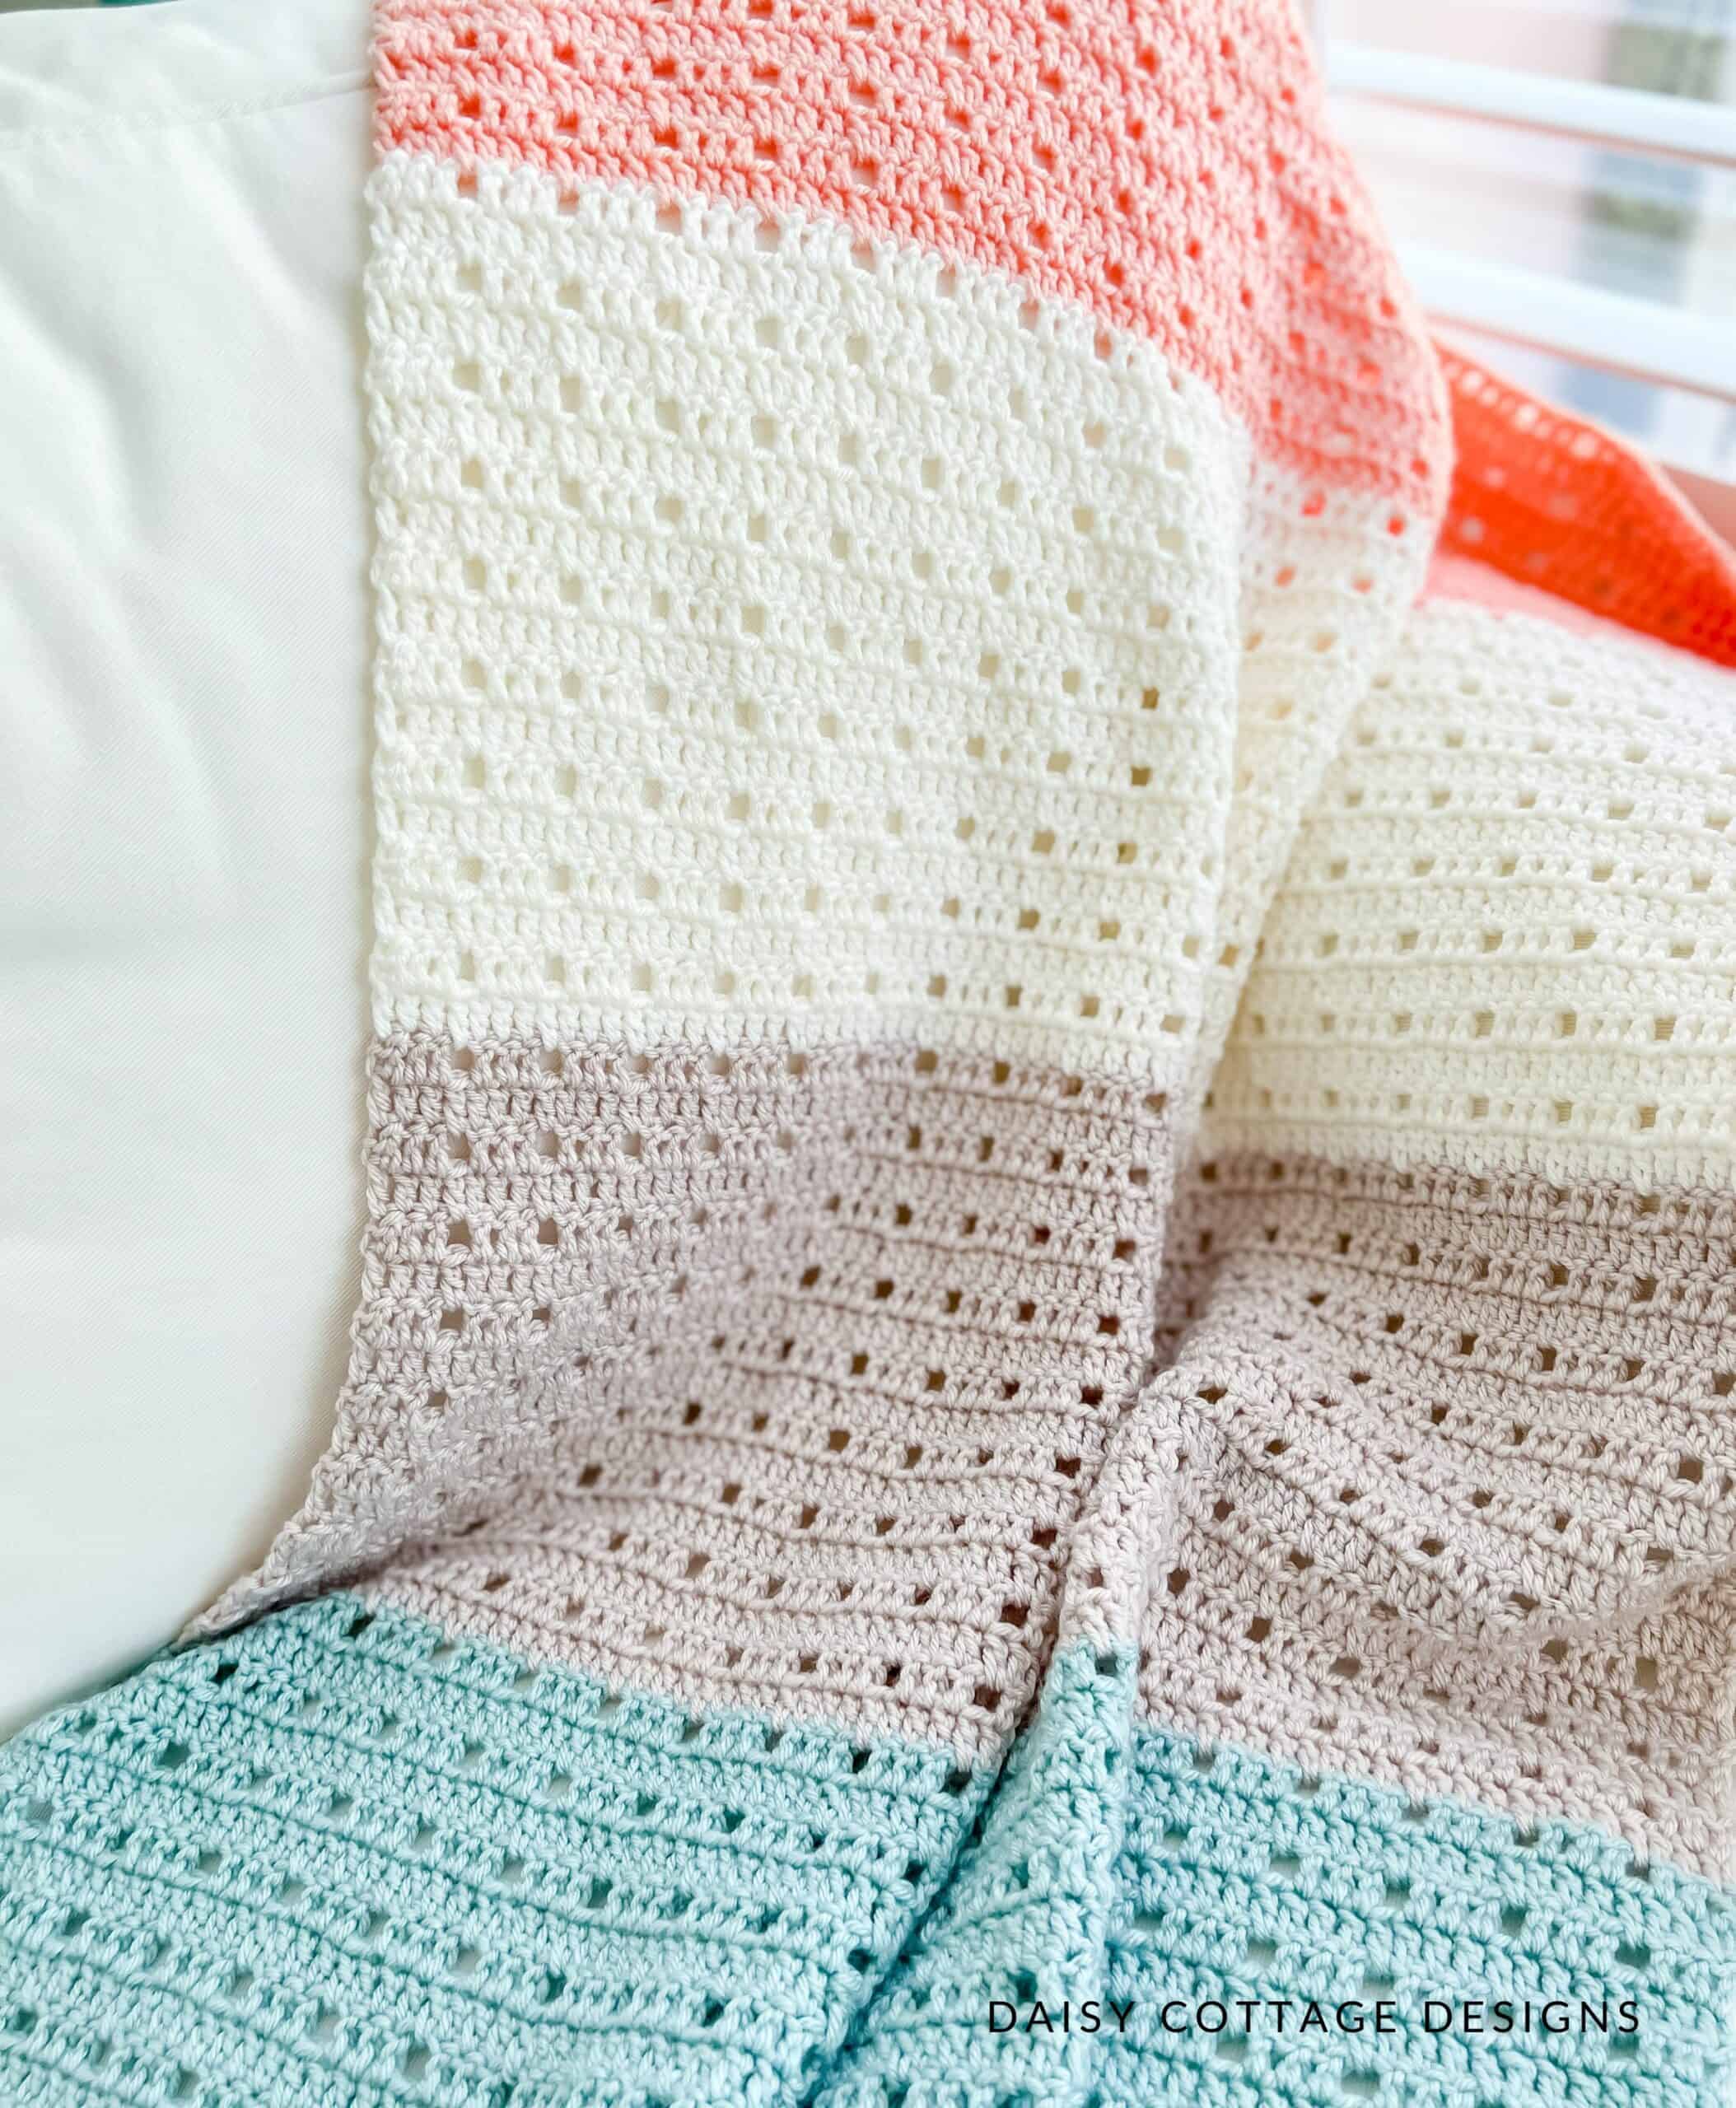 Colorful crochet blanket draped over a couch